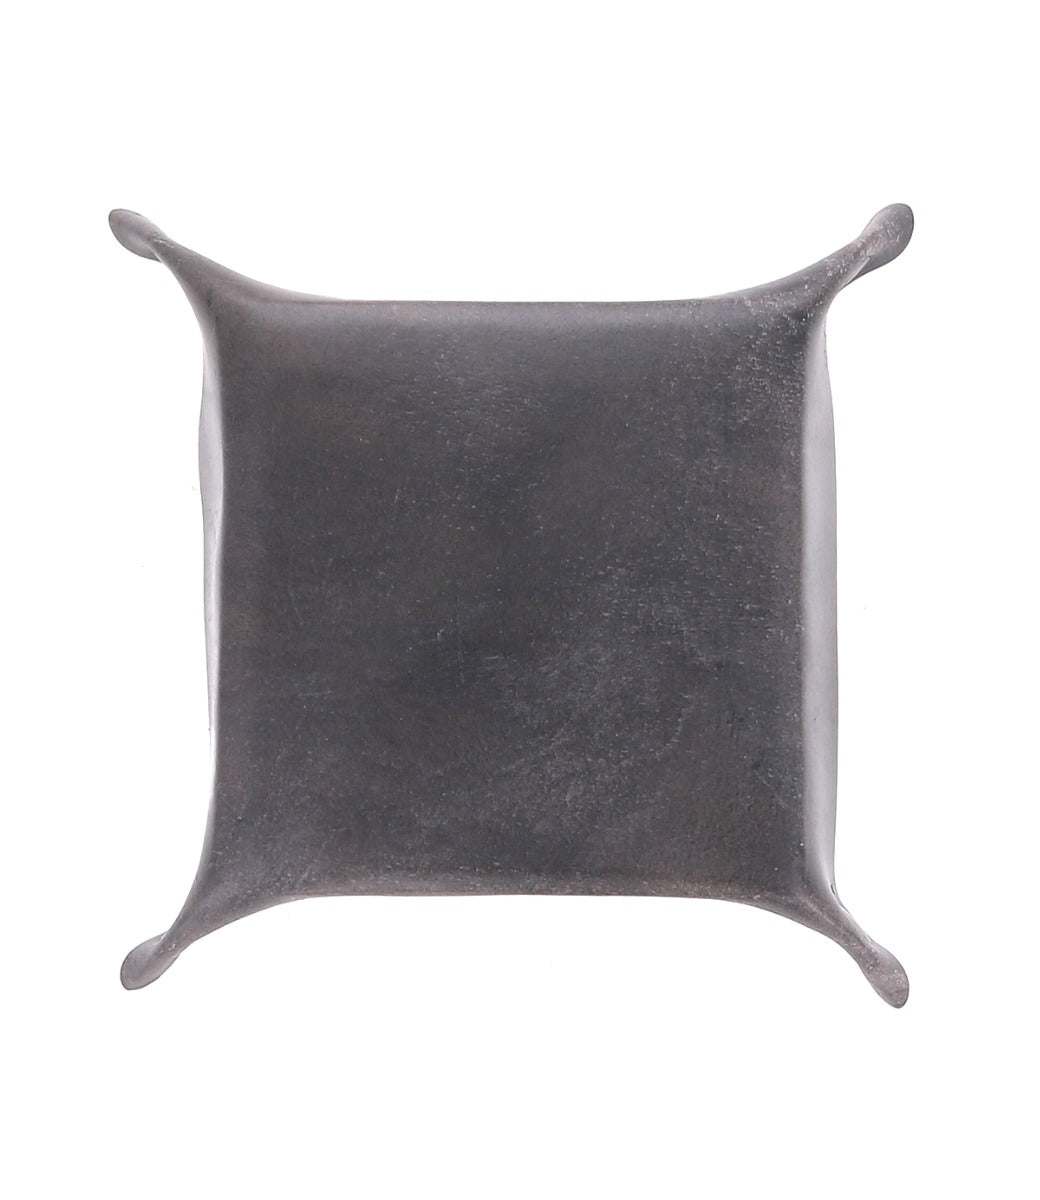 An Expanse square black leather pillow on a white background. (Brand: Bed Stu)